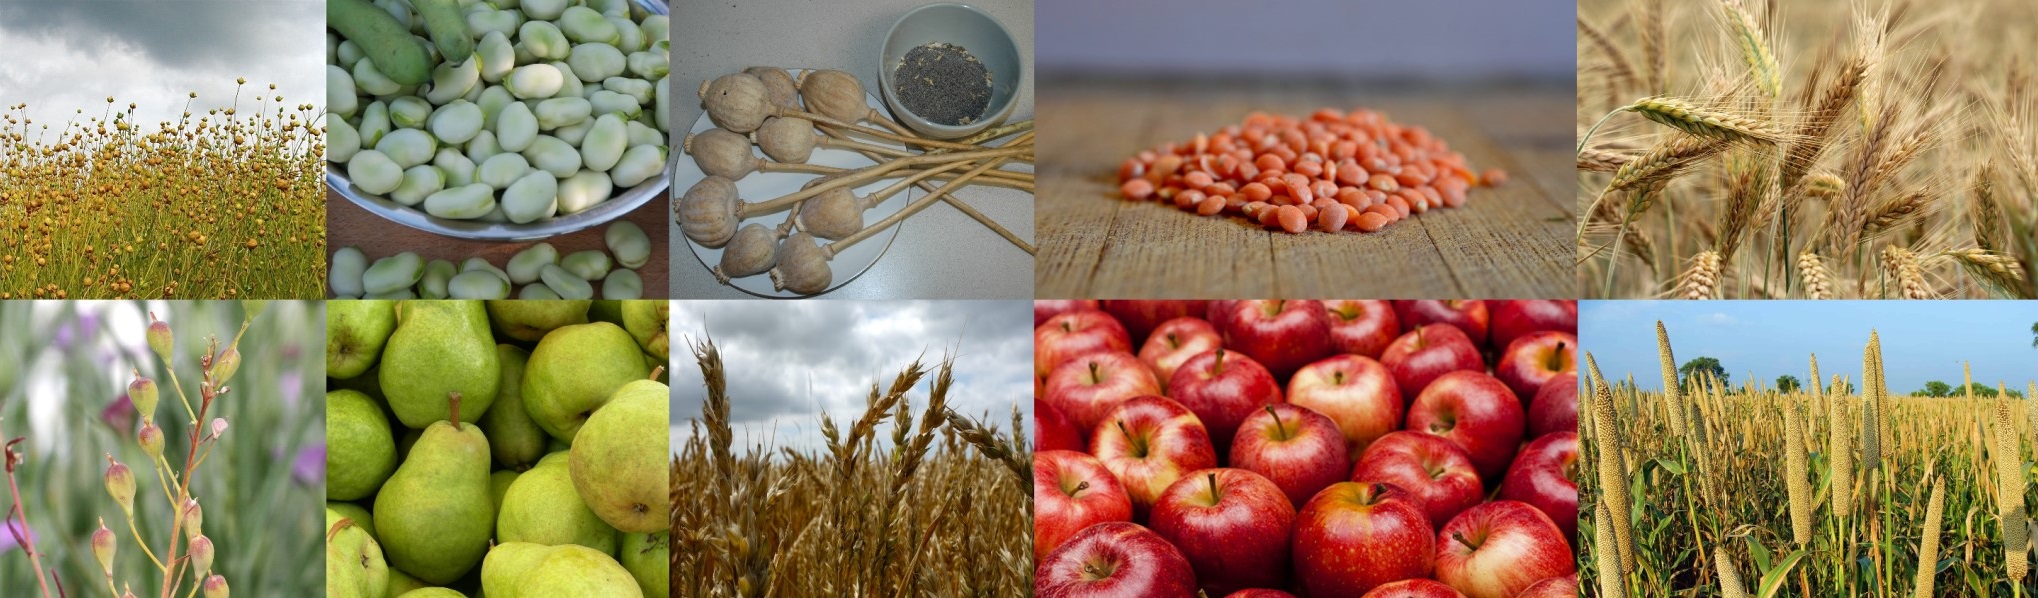 The crops and plants cultivated by Lusatian Culture included flax, fava beans, poppy, lentils, barley, camelina sativa, pears, apples and millet